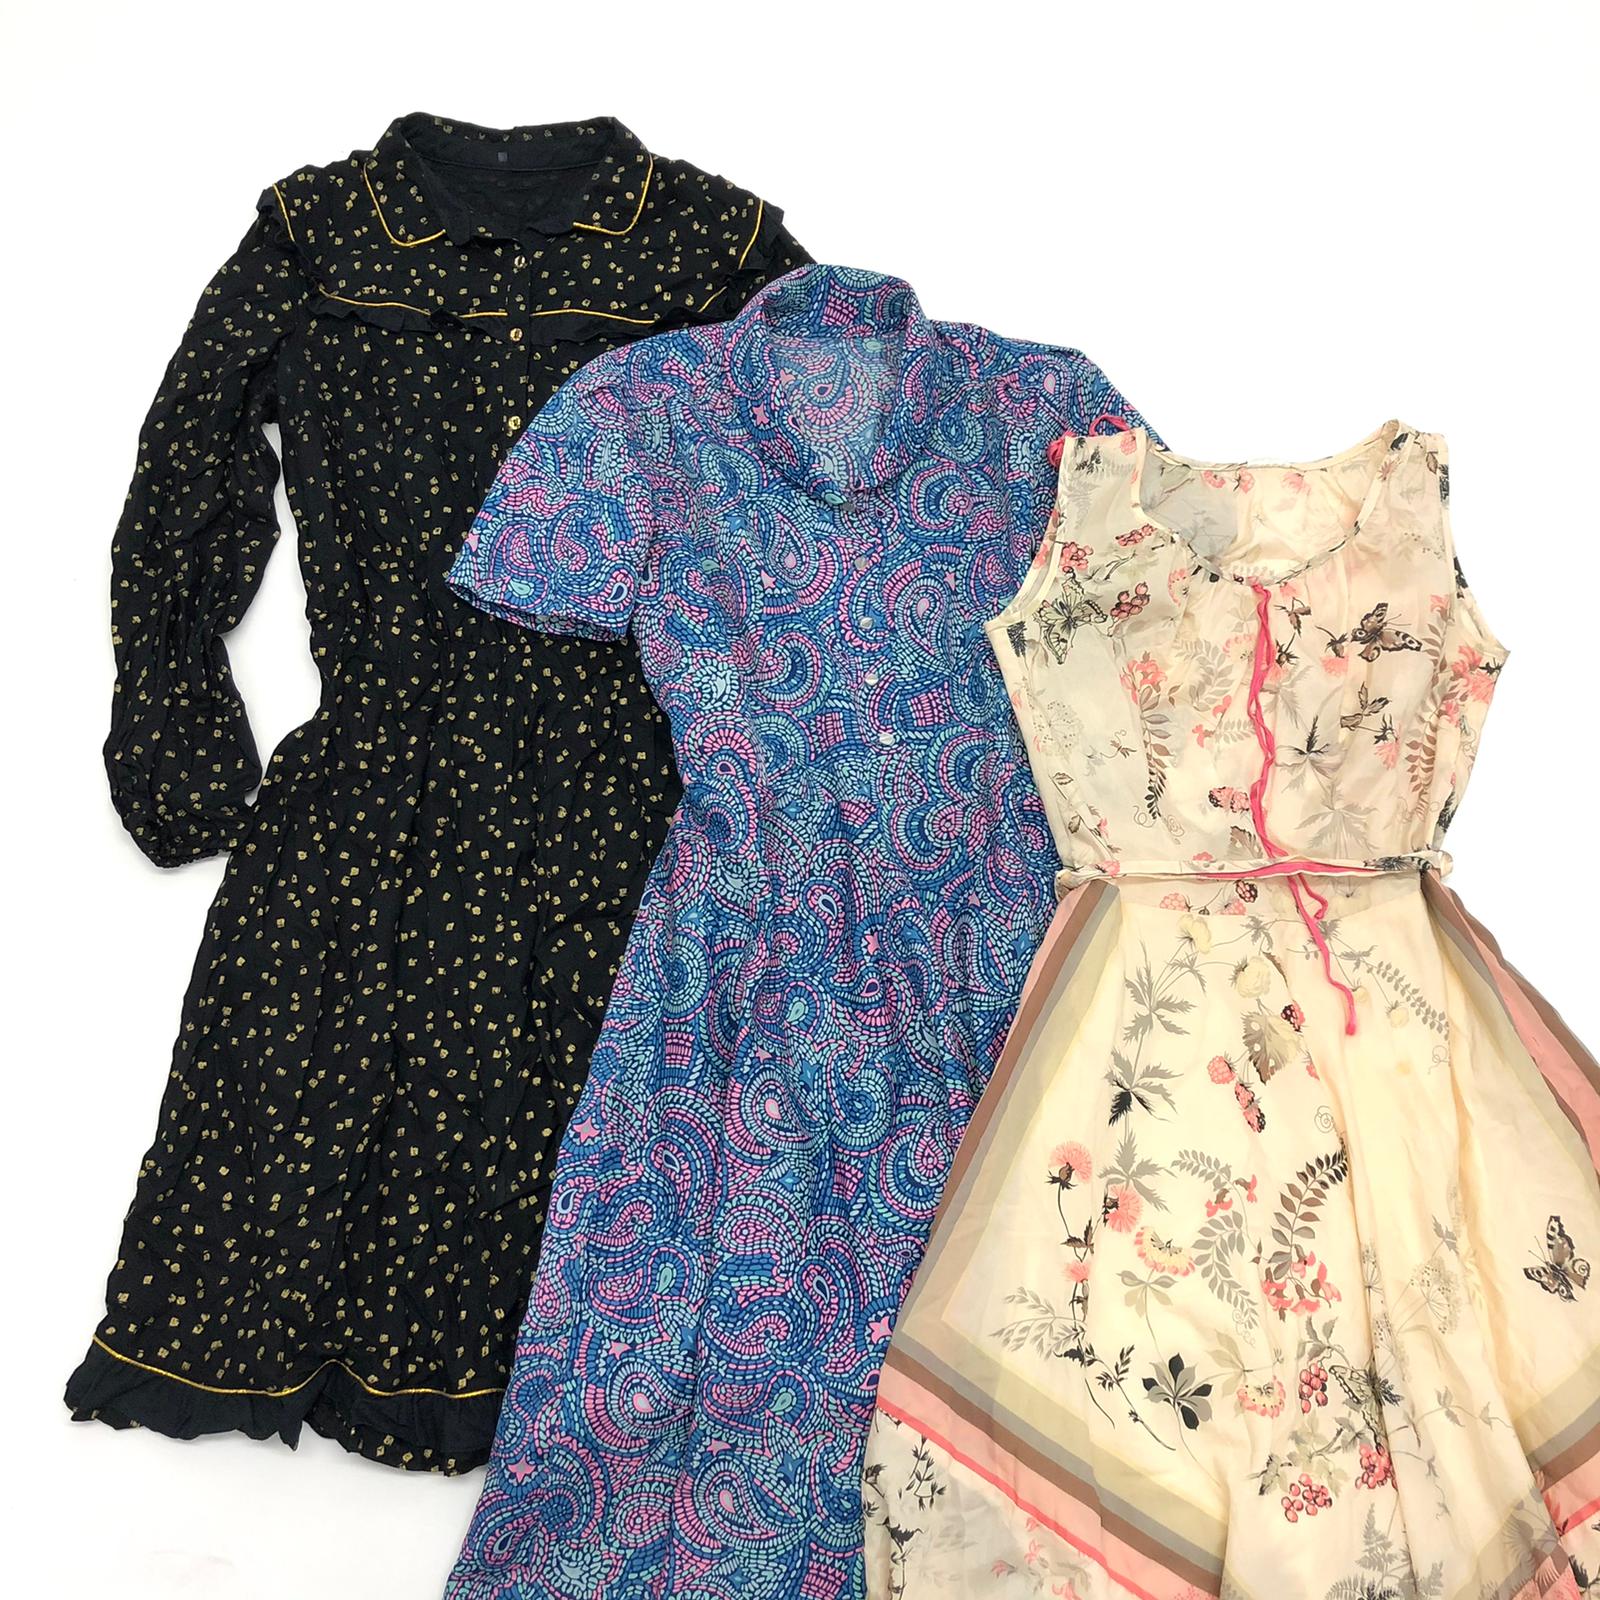 Inventory of Old Women's Dresses Wholesale in Large Quantities